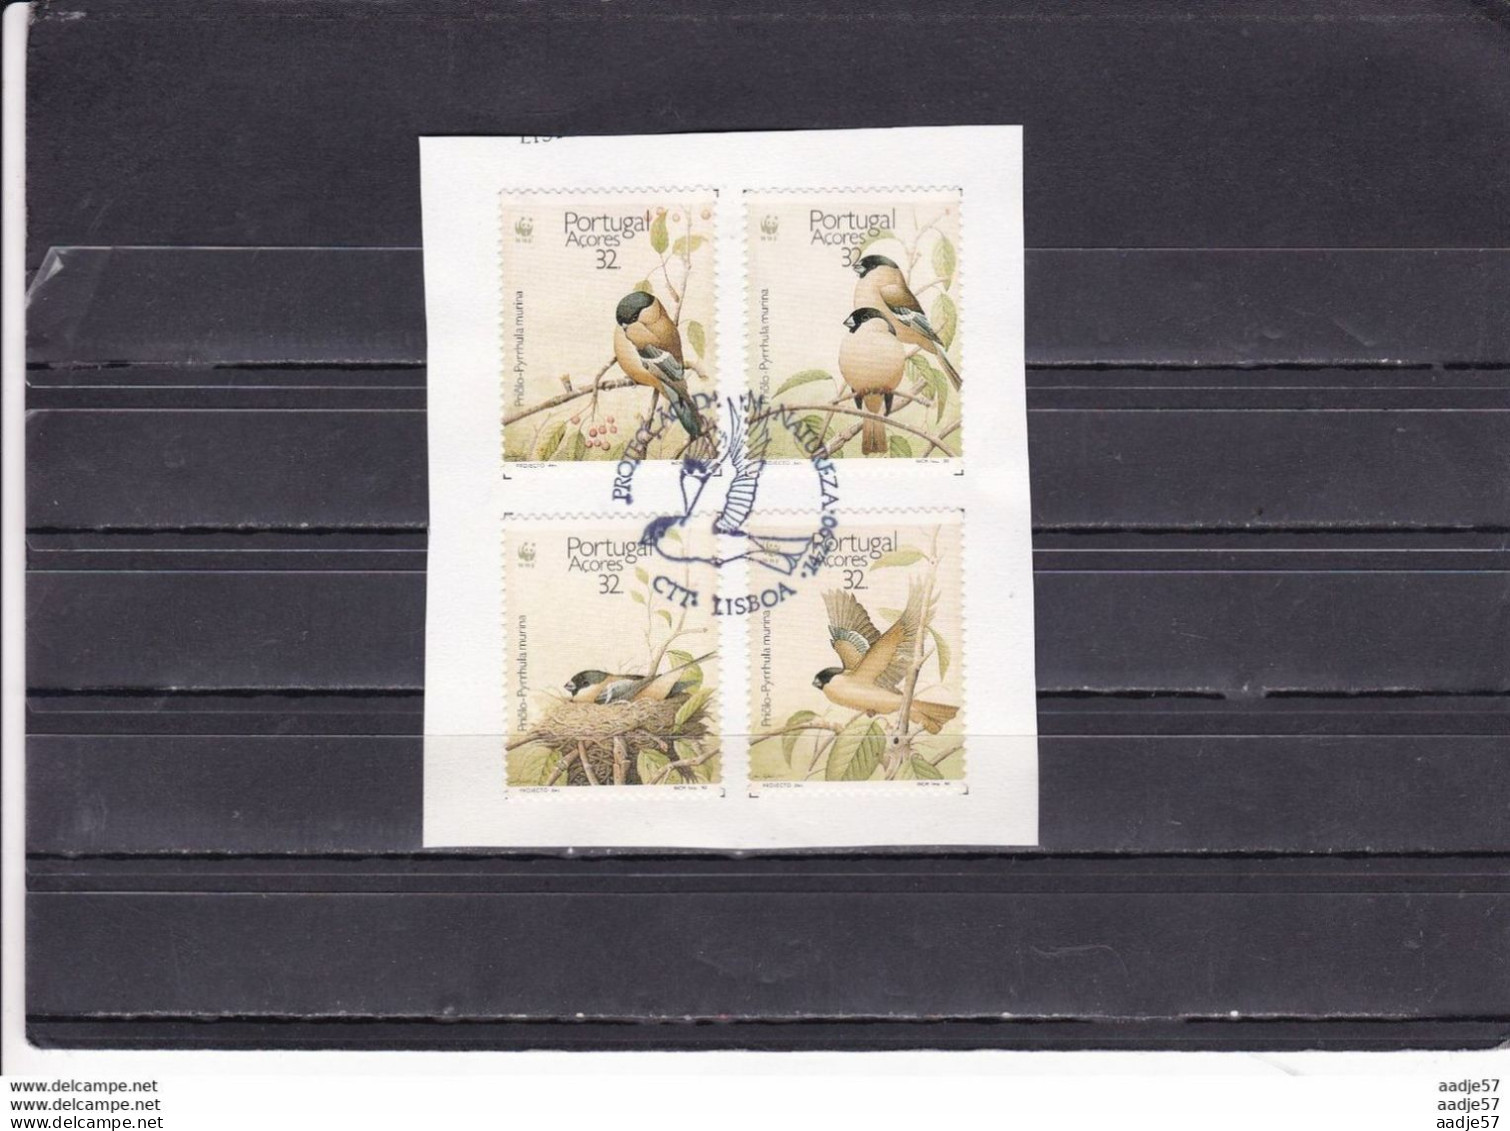 PORTUGAL ACORES 1990 Mi 405-408 , USED FDC Stamp - Sparrows